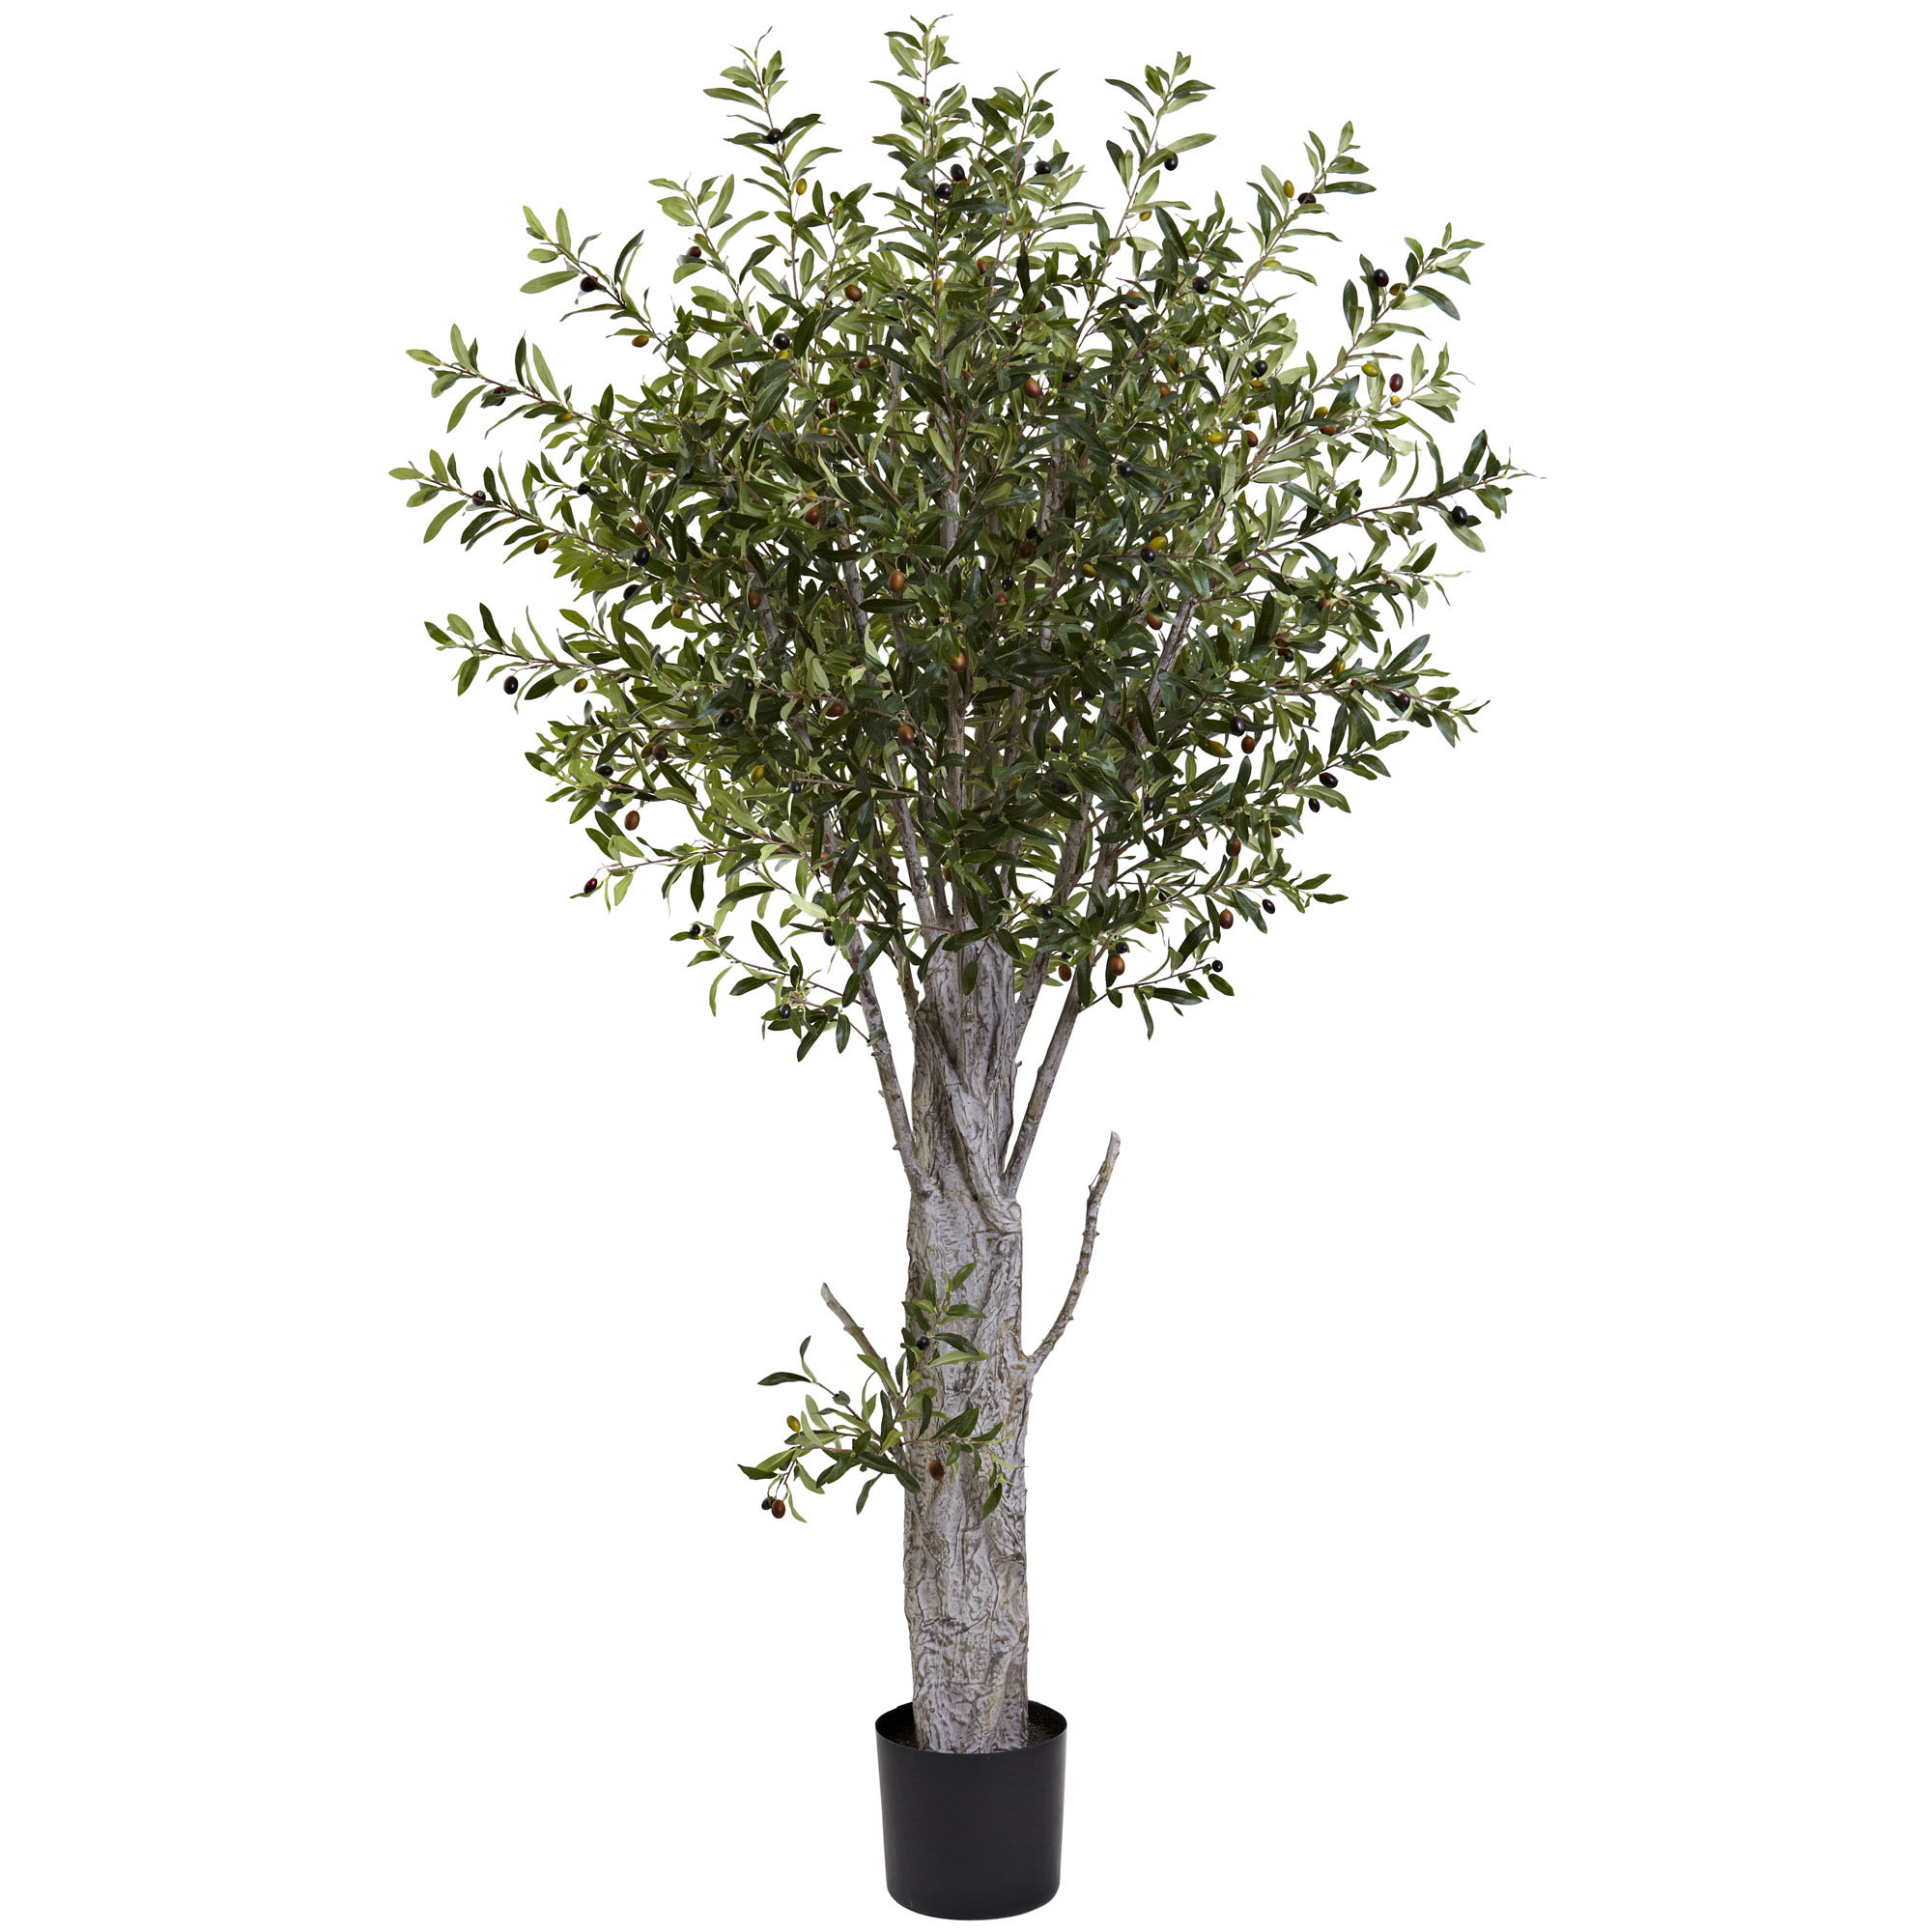 6 Foot Indoor Silk Olive Tree: Potted